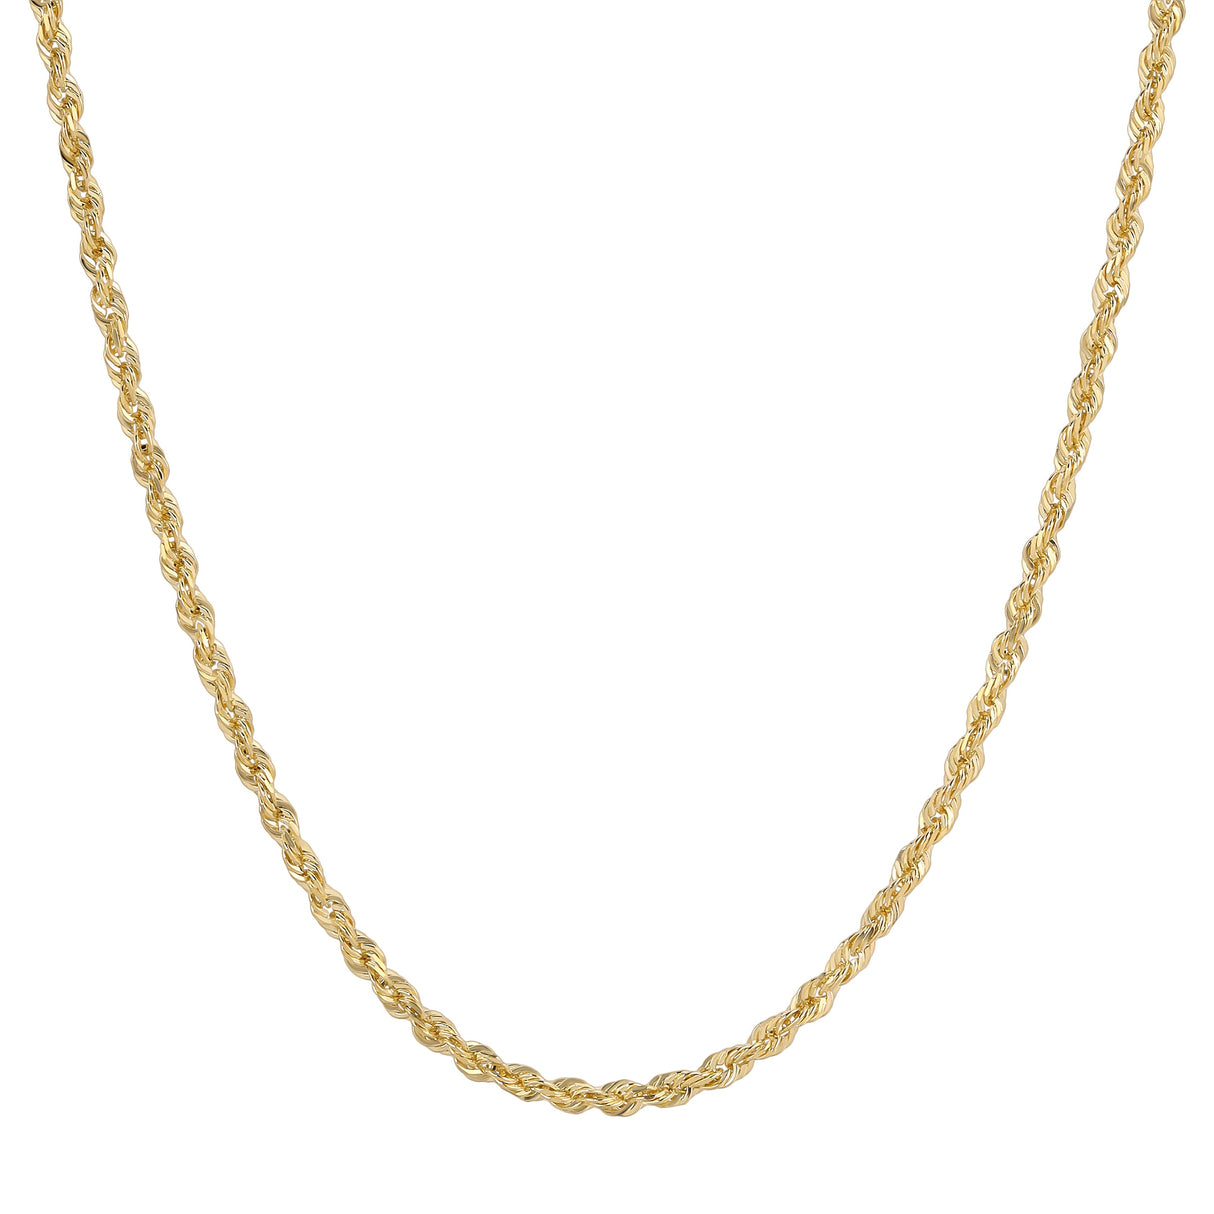 10K Hollow Yellow 1.50mm-6.00mm Gold Chains for Men | Italian Fashions